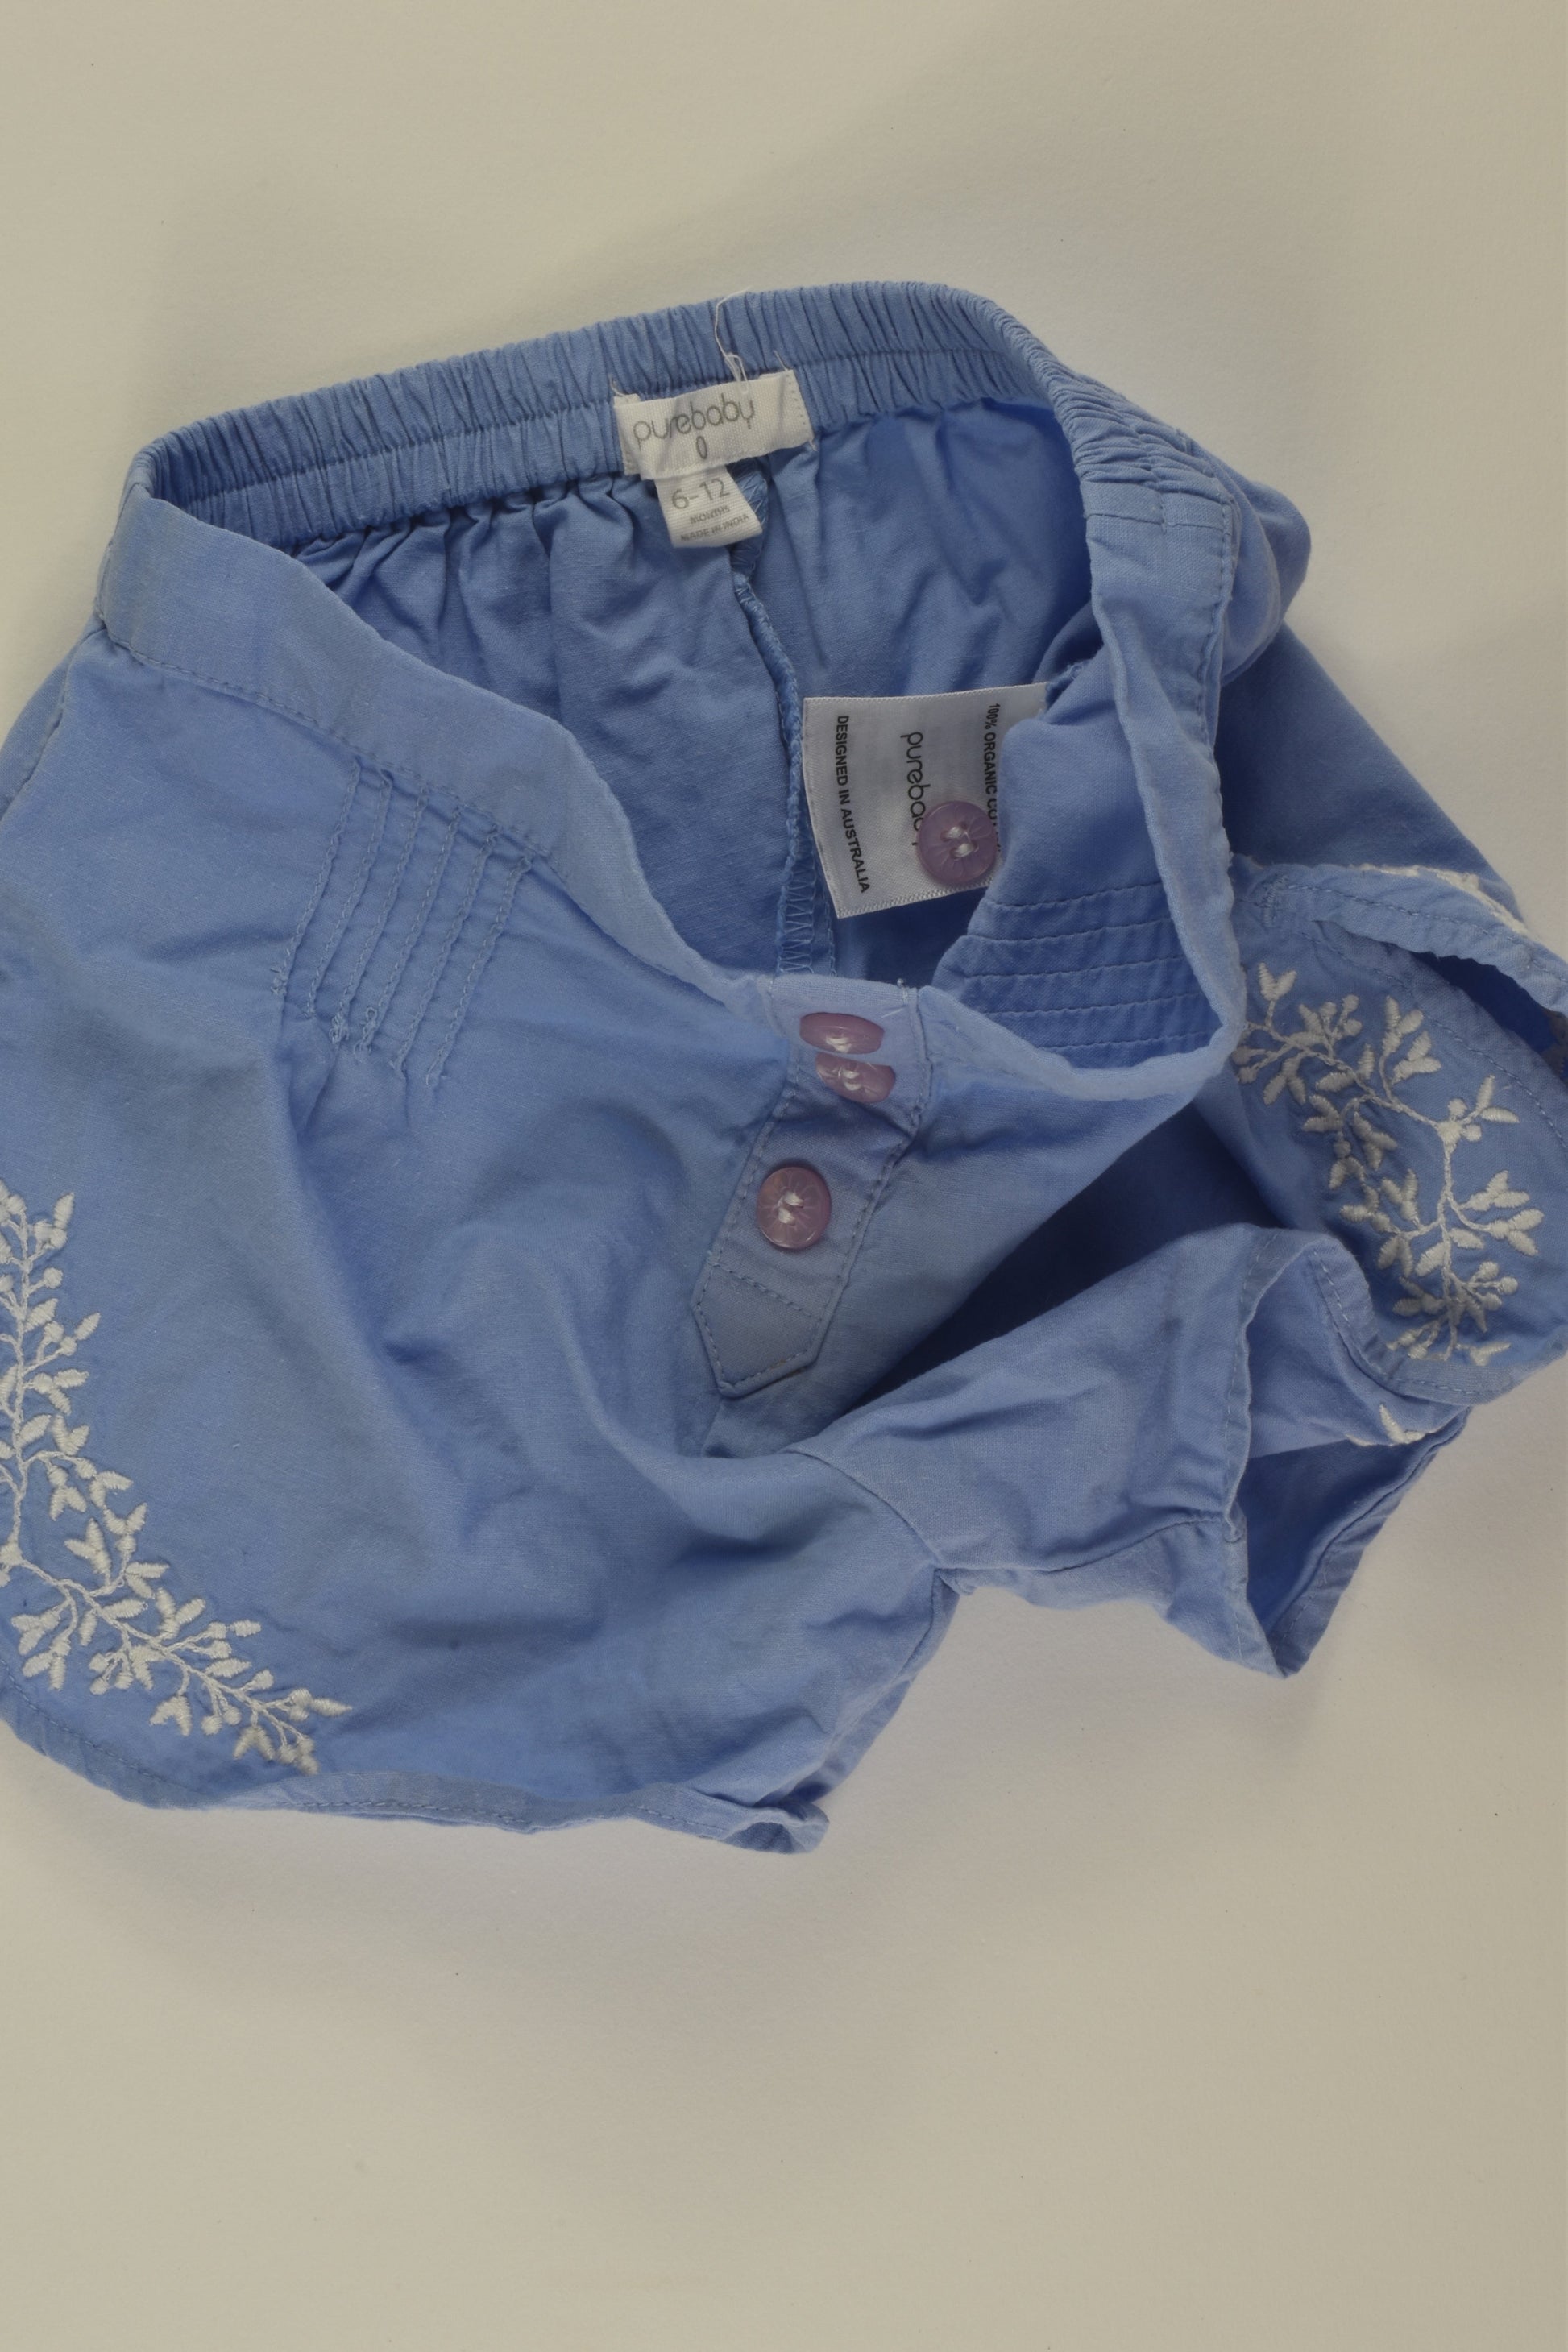 Purebaby Size 0 Embroidery Shorts